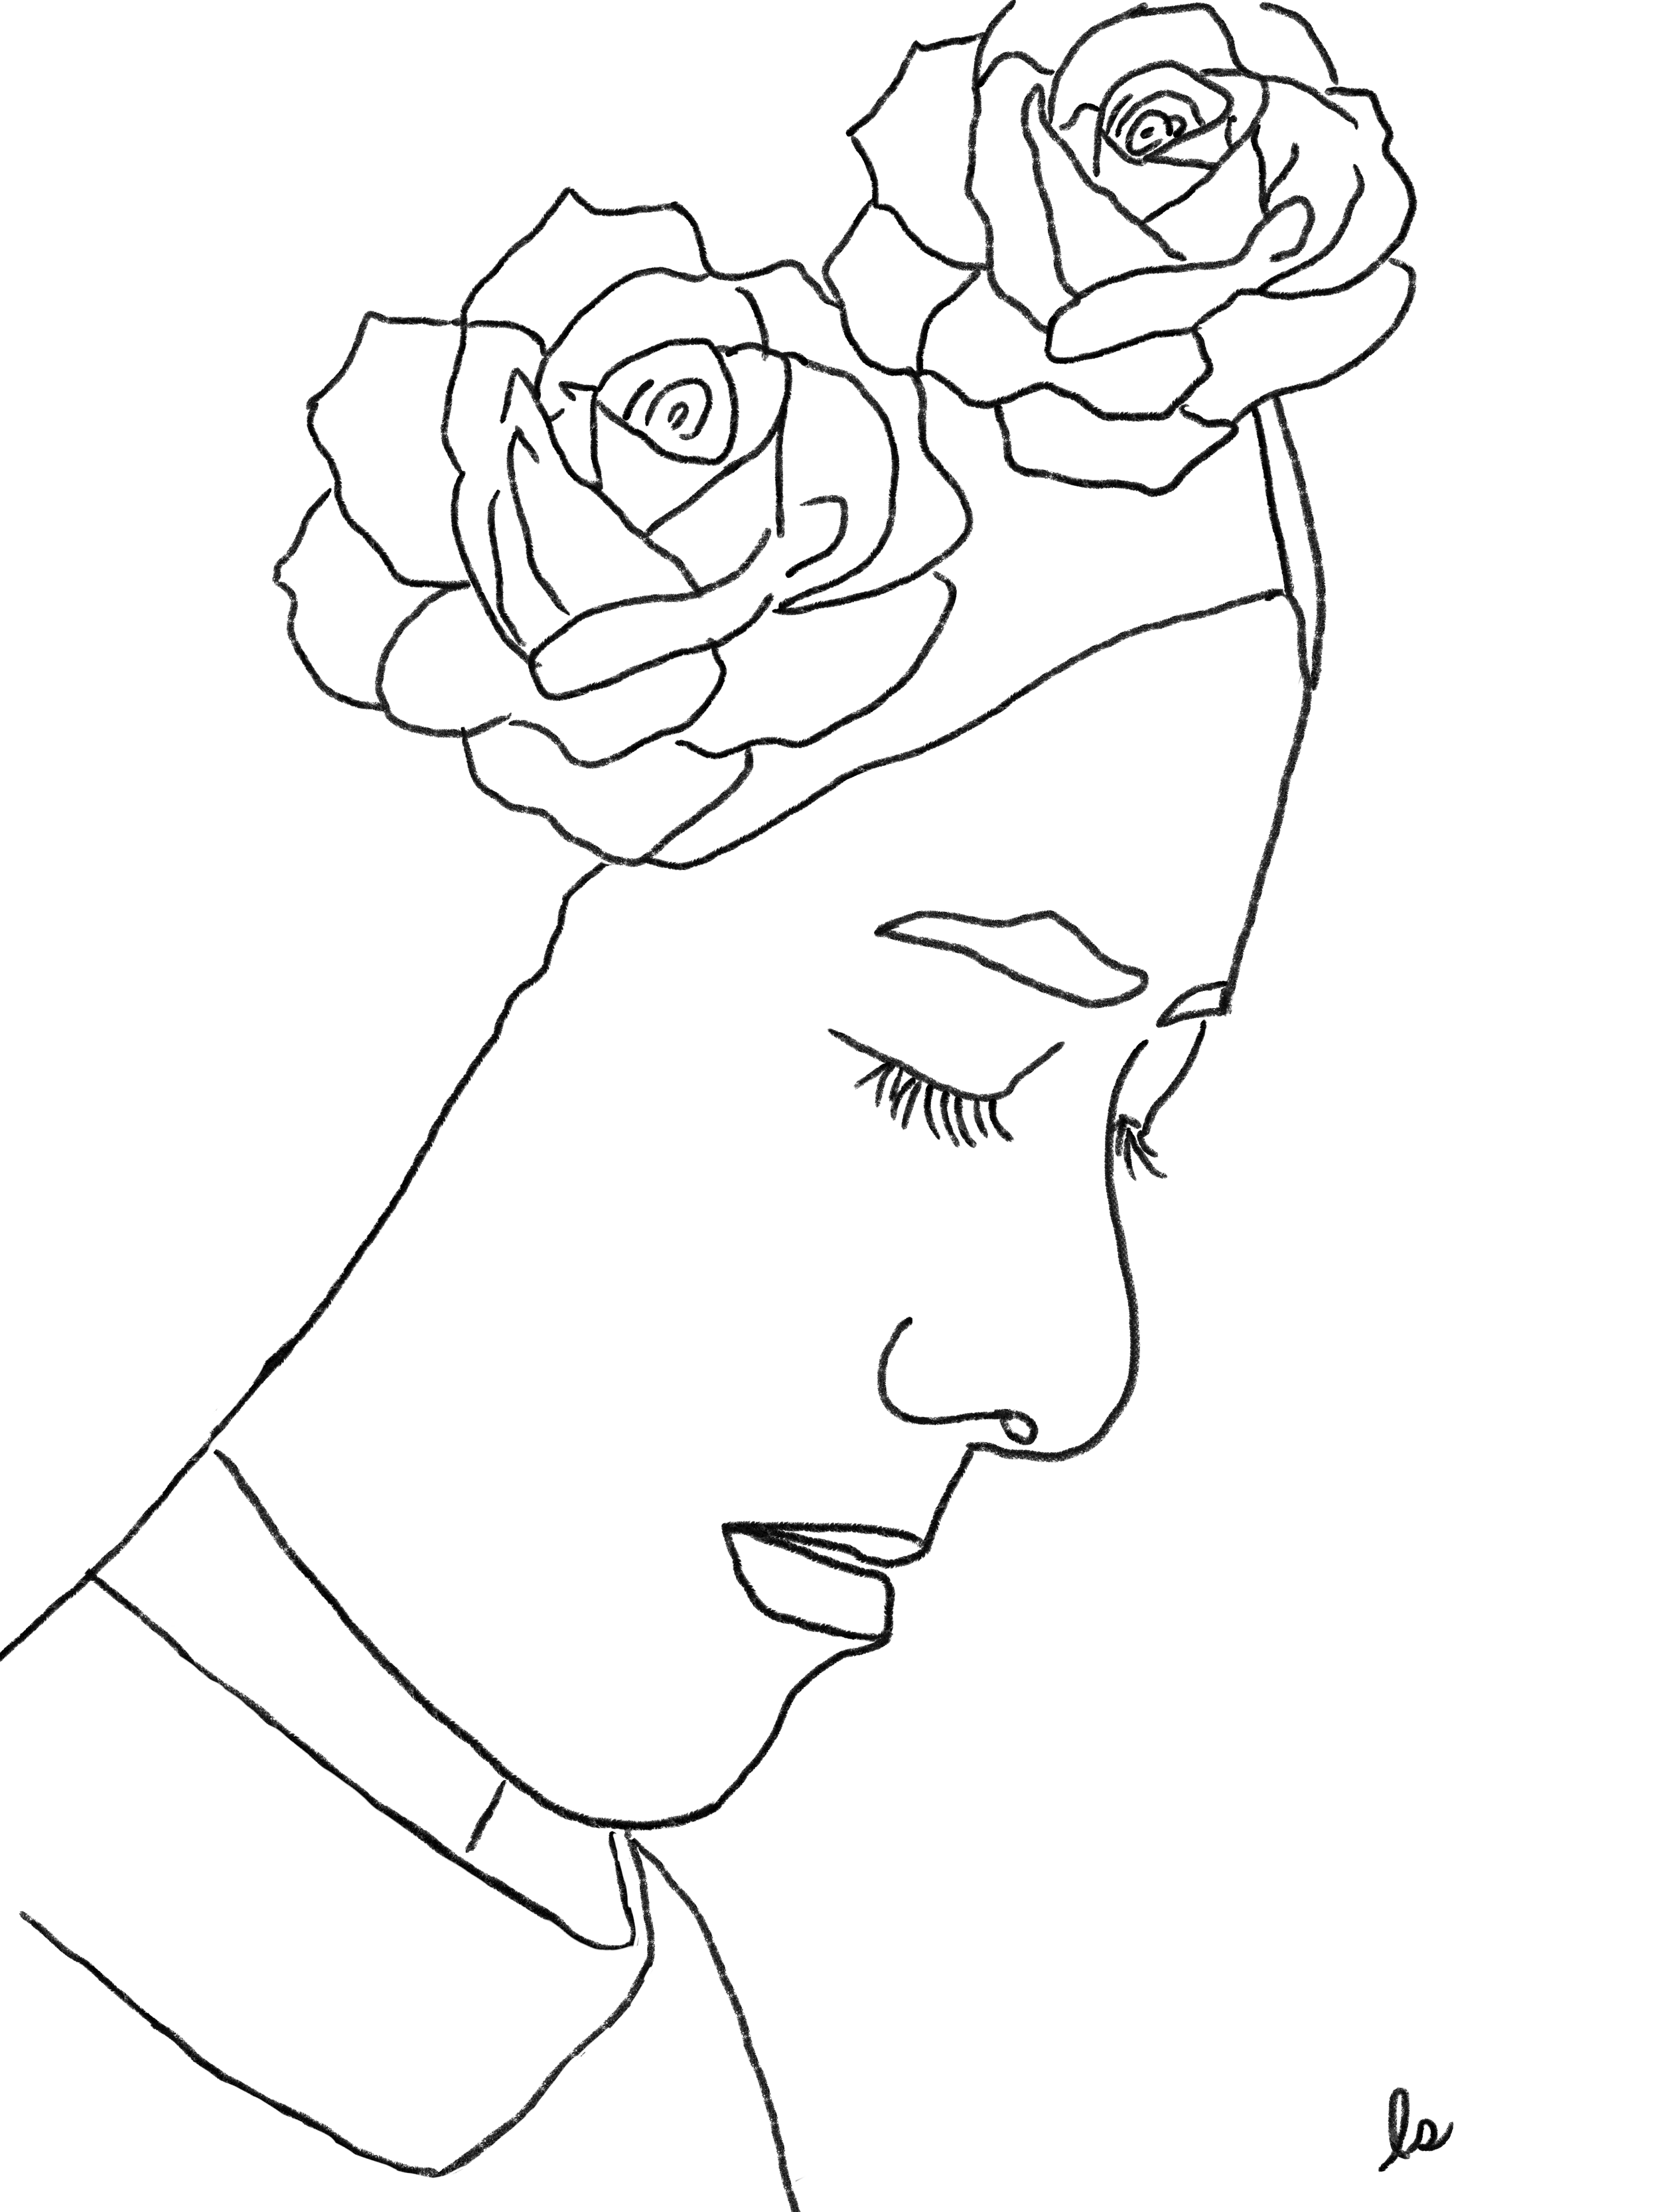 15 Line Drawings of Beautiful Women You Need In Your Life — The ...